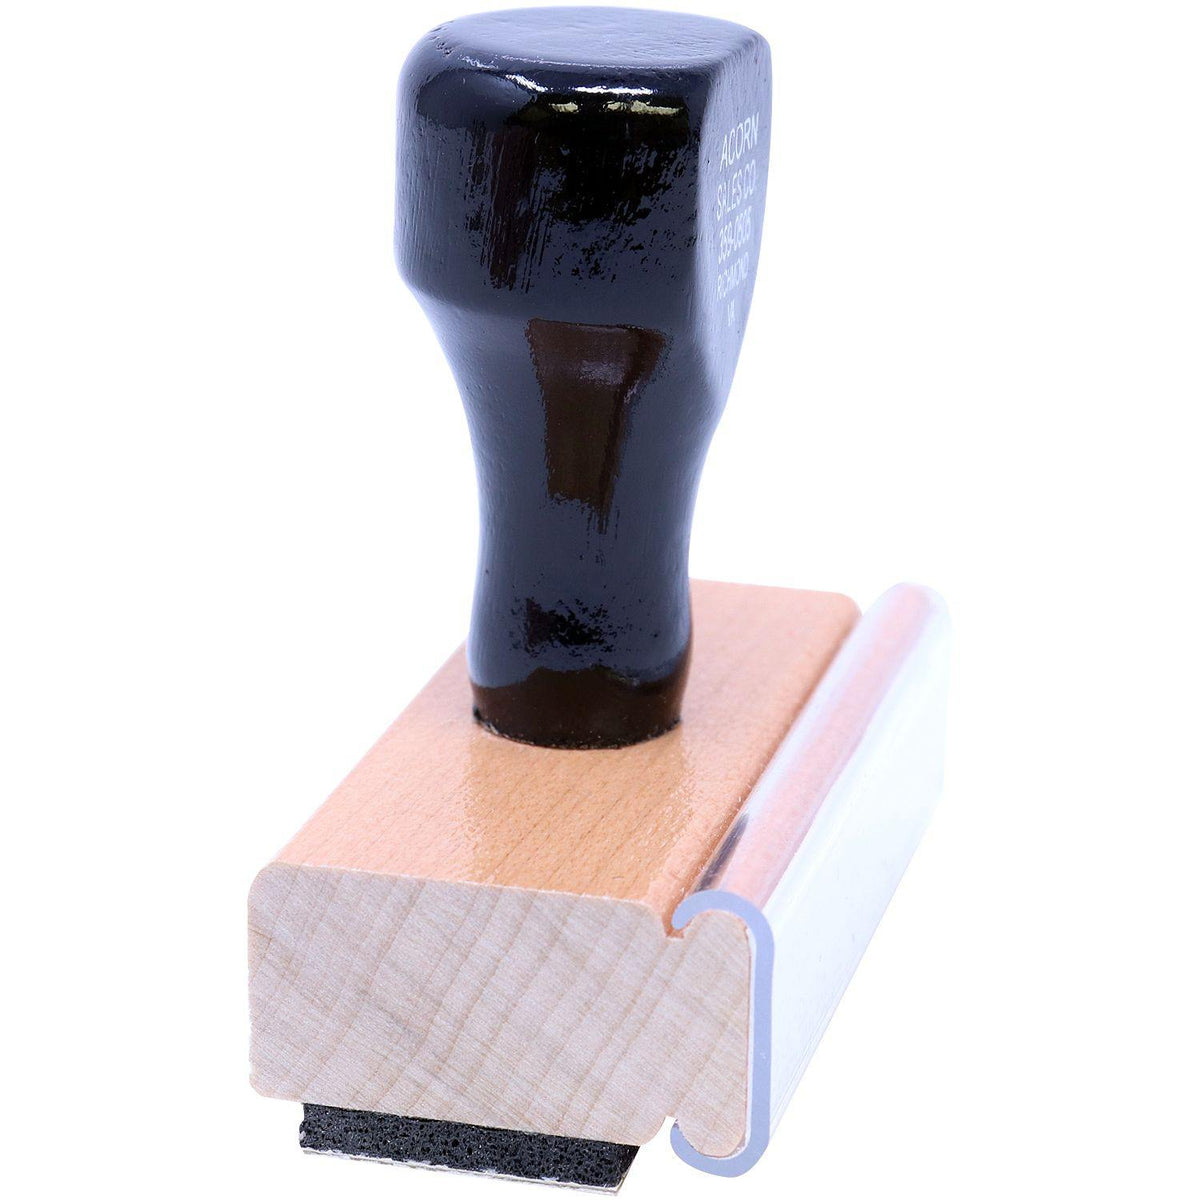 Side View of Aviso Rubber Stamp at an Angle